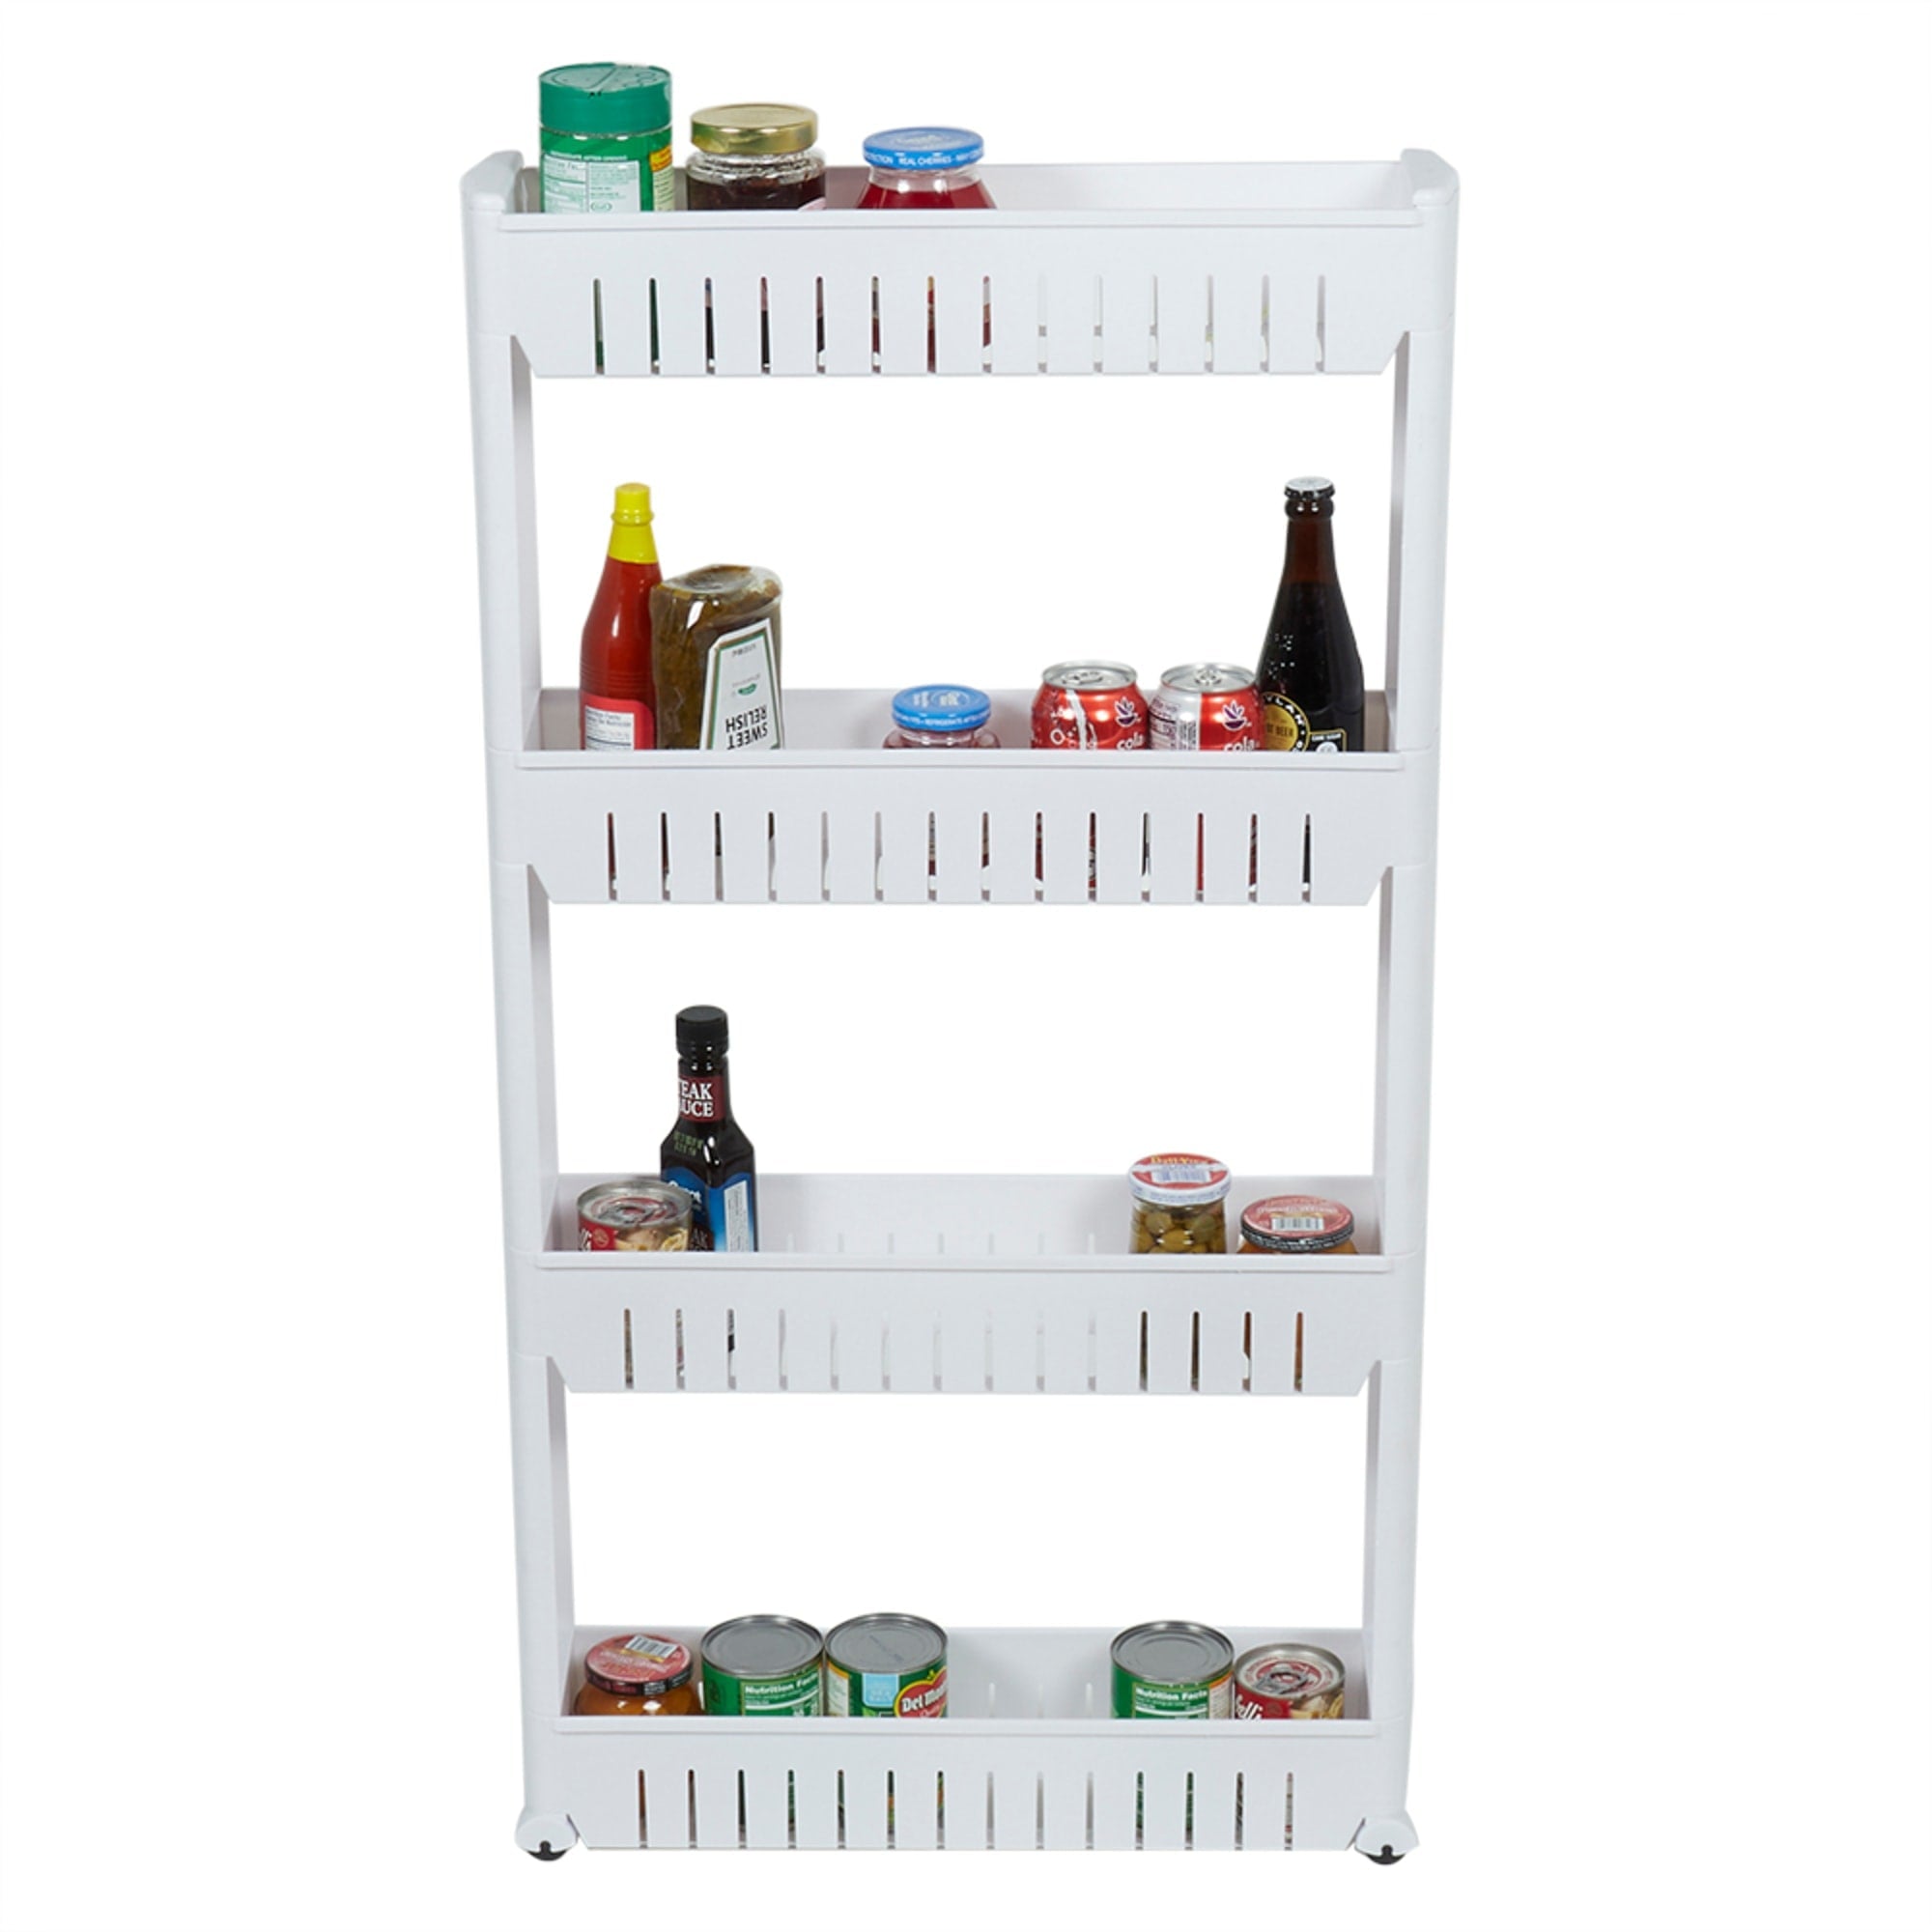 Home Basics 4 Tier Plastic Storage Tower with Wheels $15.00 EACH, CASE PACK OF 4